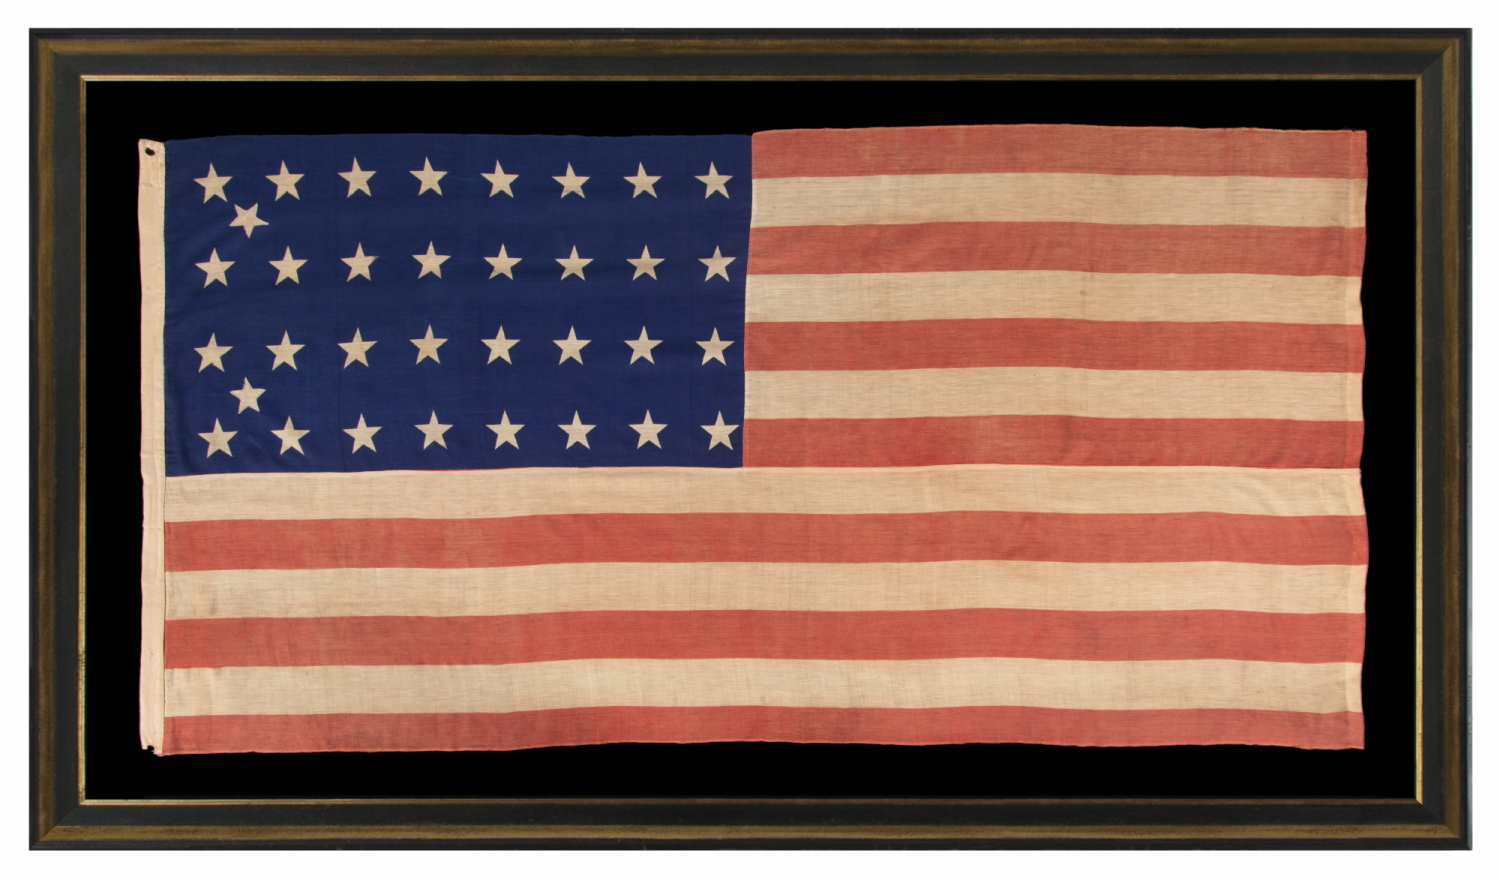 34 STAR ANTIQUE AMERICAN FLAG OF THE CIVIL WAR PERIOD (1861-63), WITH WOVEN STRIPES, PRESS-DYED STARS, AND BEAUTIFUL COLORS, POSSIBLY MADE IN NEW YORK BY THE ANNIN COMPANY, REFLECTS THE ADDITION OF KANSAS TO THE UNION, 1861-1863